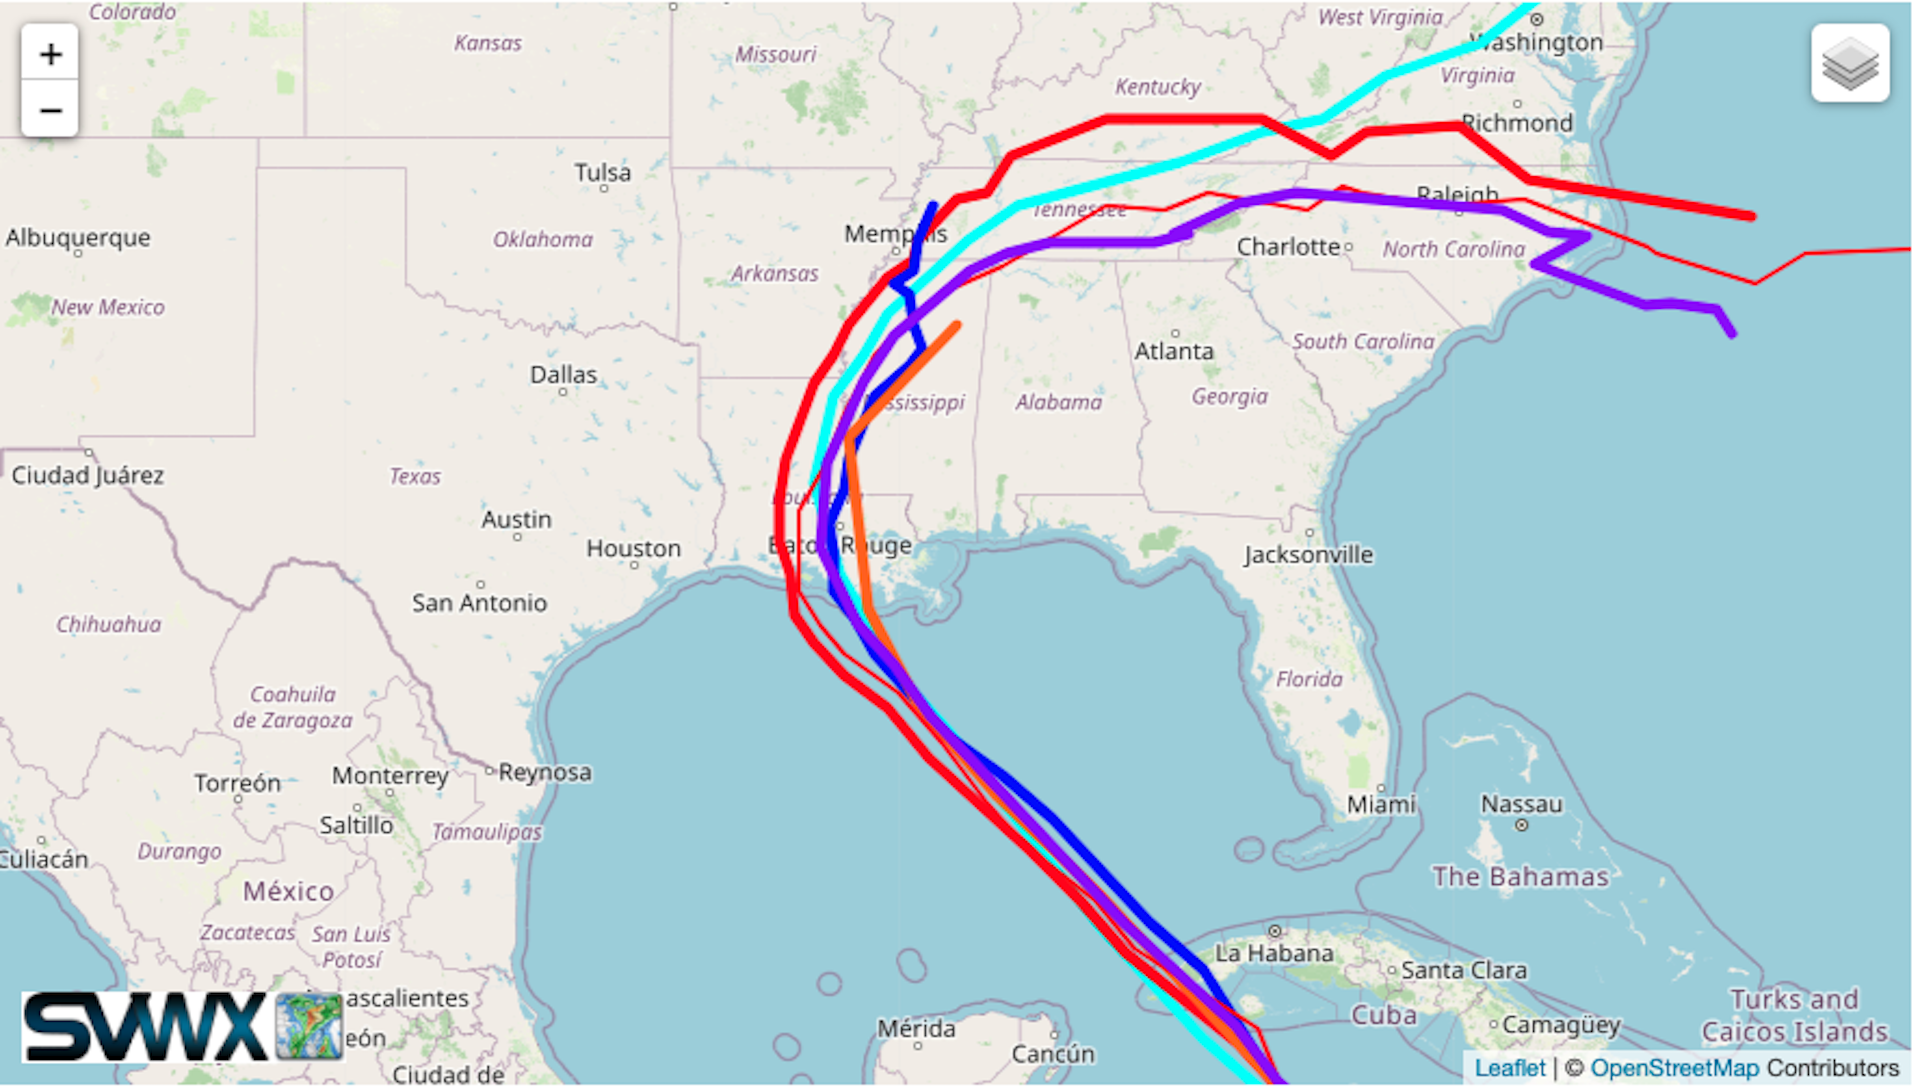 Computer model storm track projections, showing lines directed at coastal Louisiana.